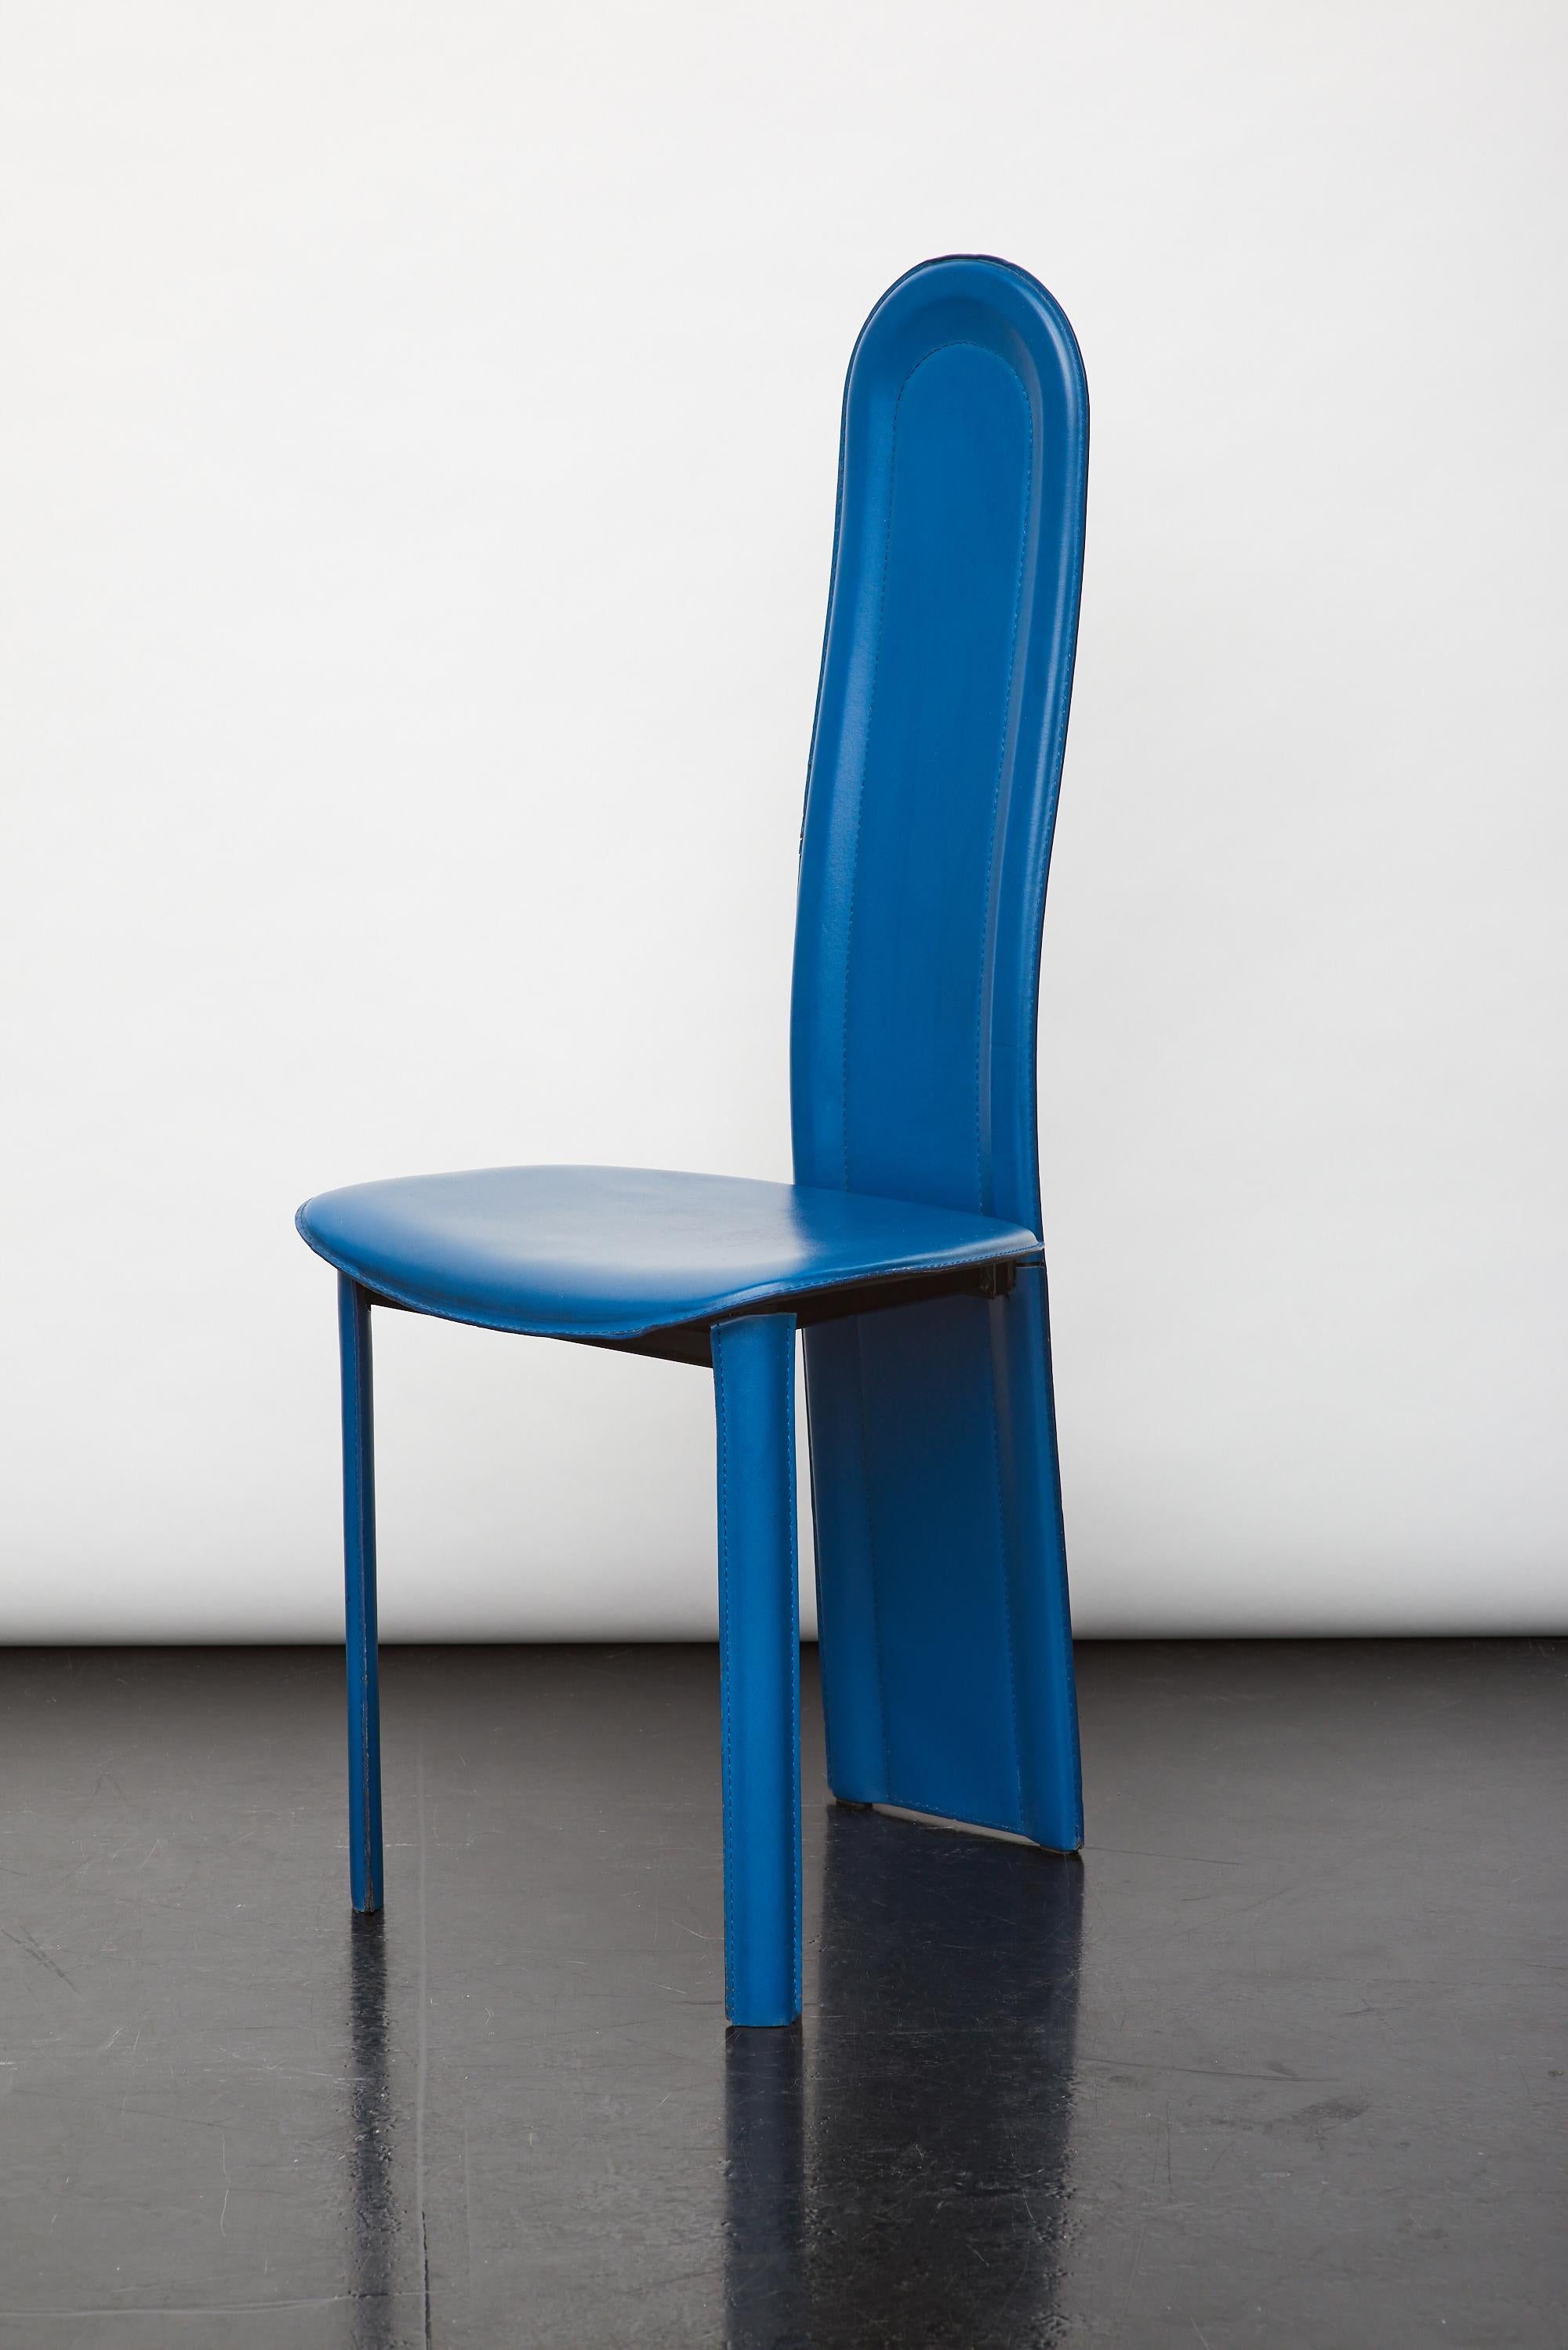 Italian Set of 4 Blue Leather High Back Dining Chairs, 1980s